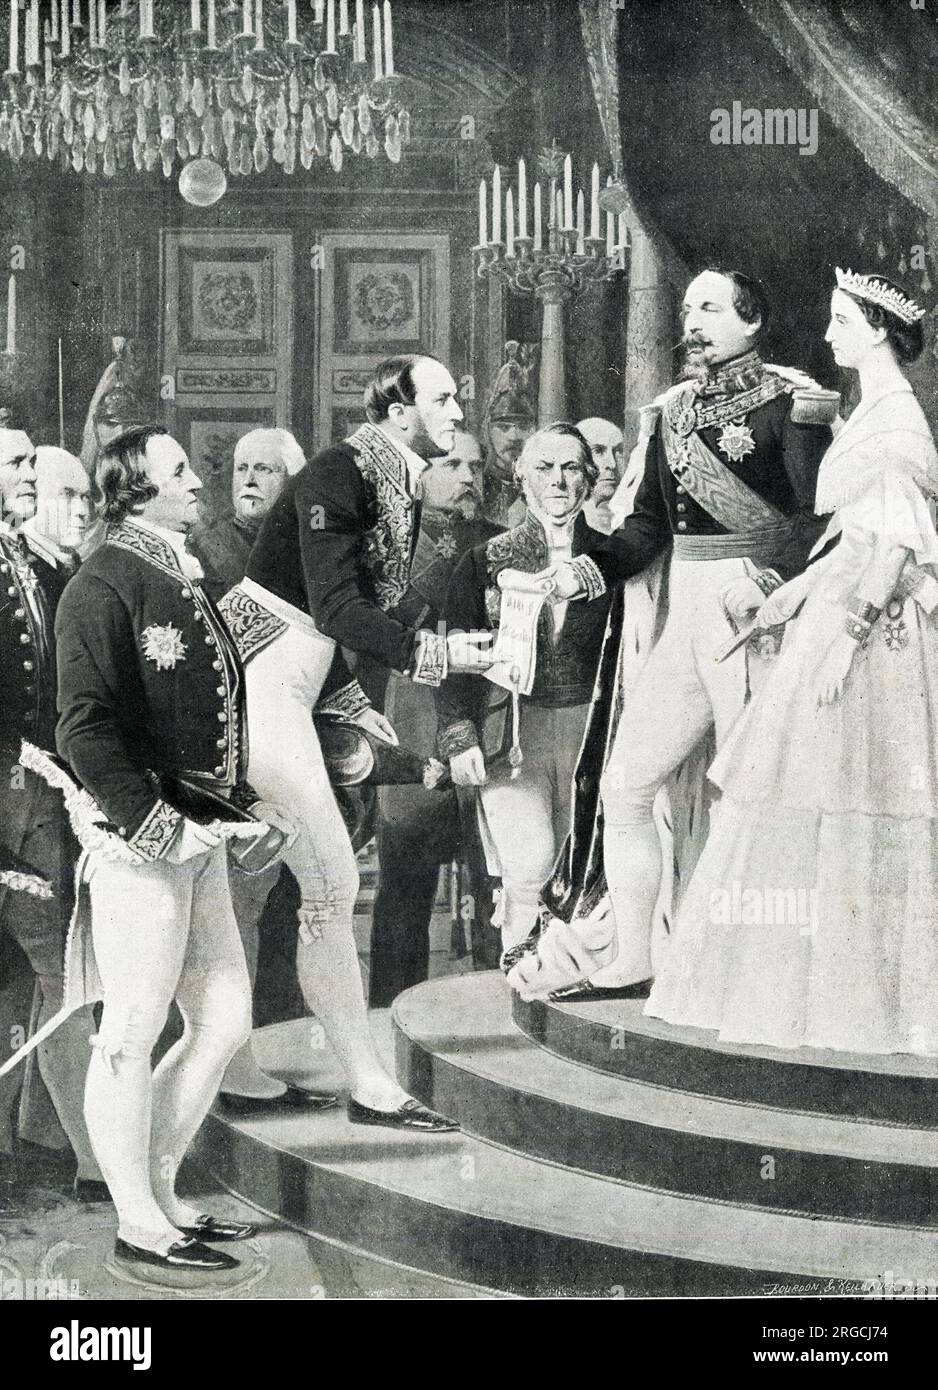 Napoleon III handing over the decree of annexation of the suburbs of Paris to Baron Haussmann, for urban development (16 February 1859). Others present are J-B Dumas, chemist and president of the municipal council, General Fleury and General Rolin. This version of the painting includes the Empress Eugenie, and was intended to be more impressive than the earlier version.   (2 of 2) Stock Photo